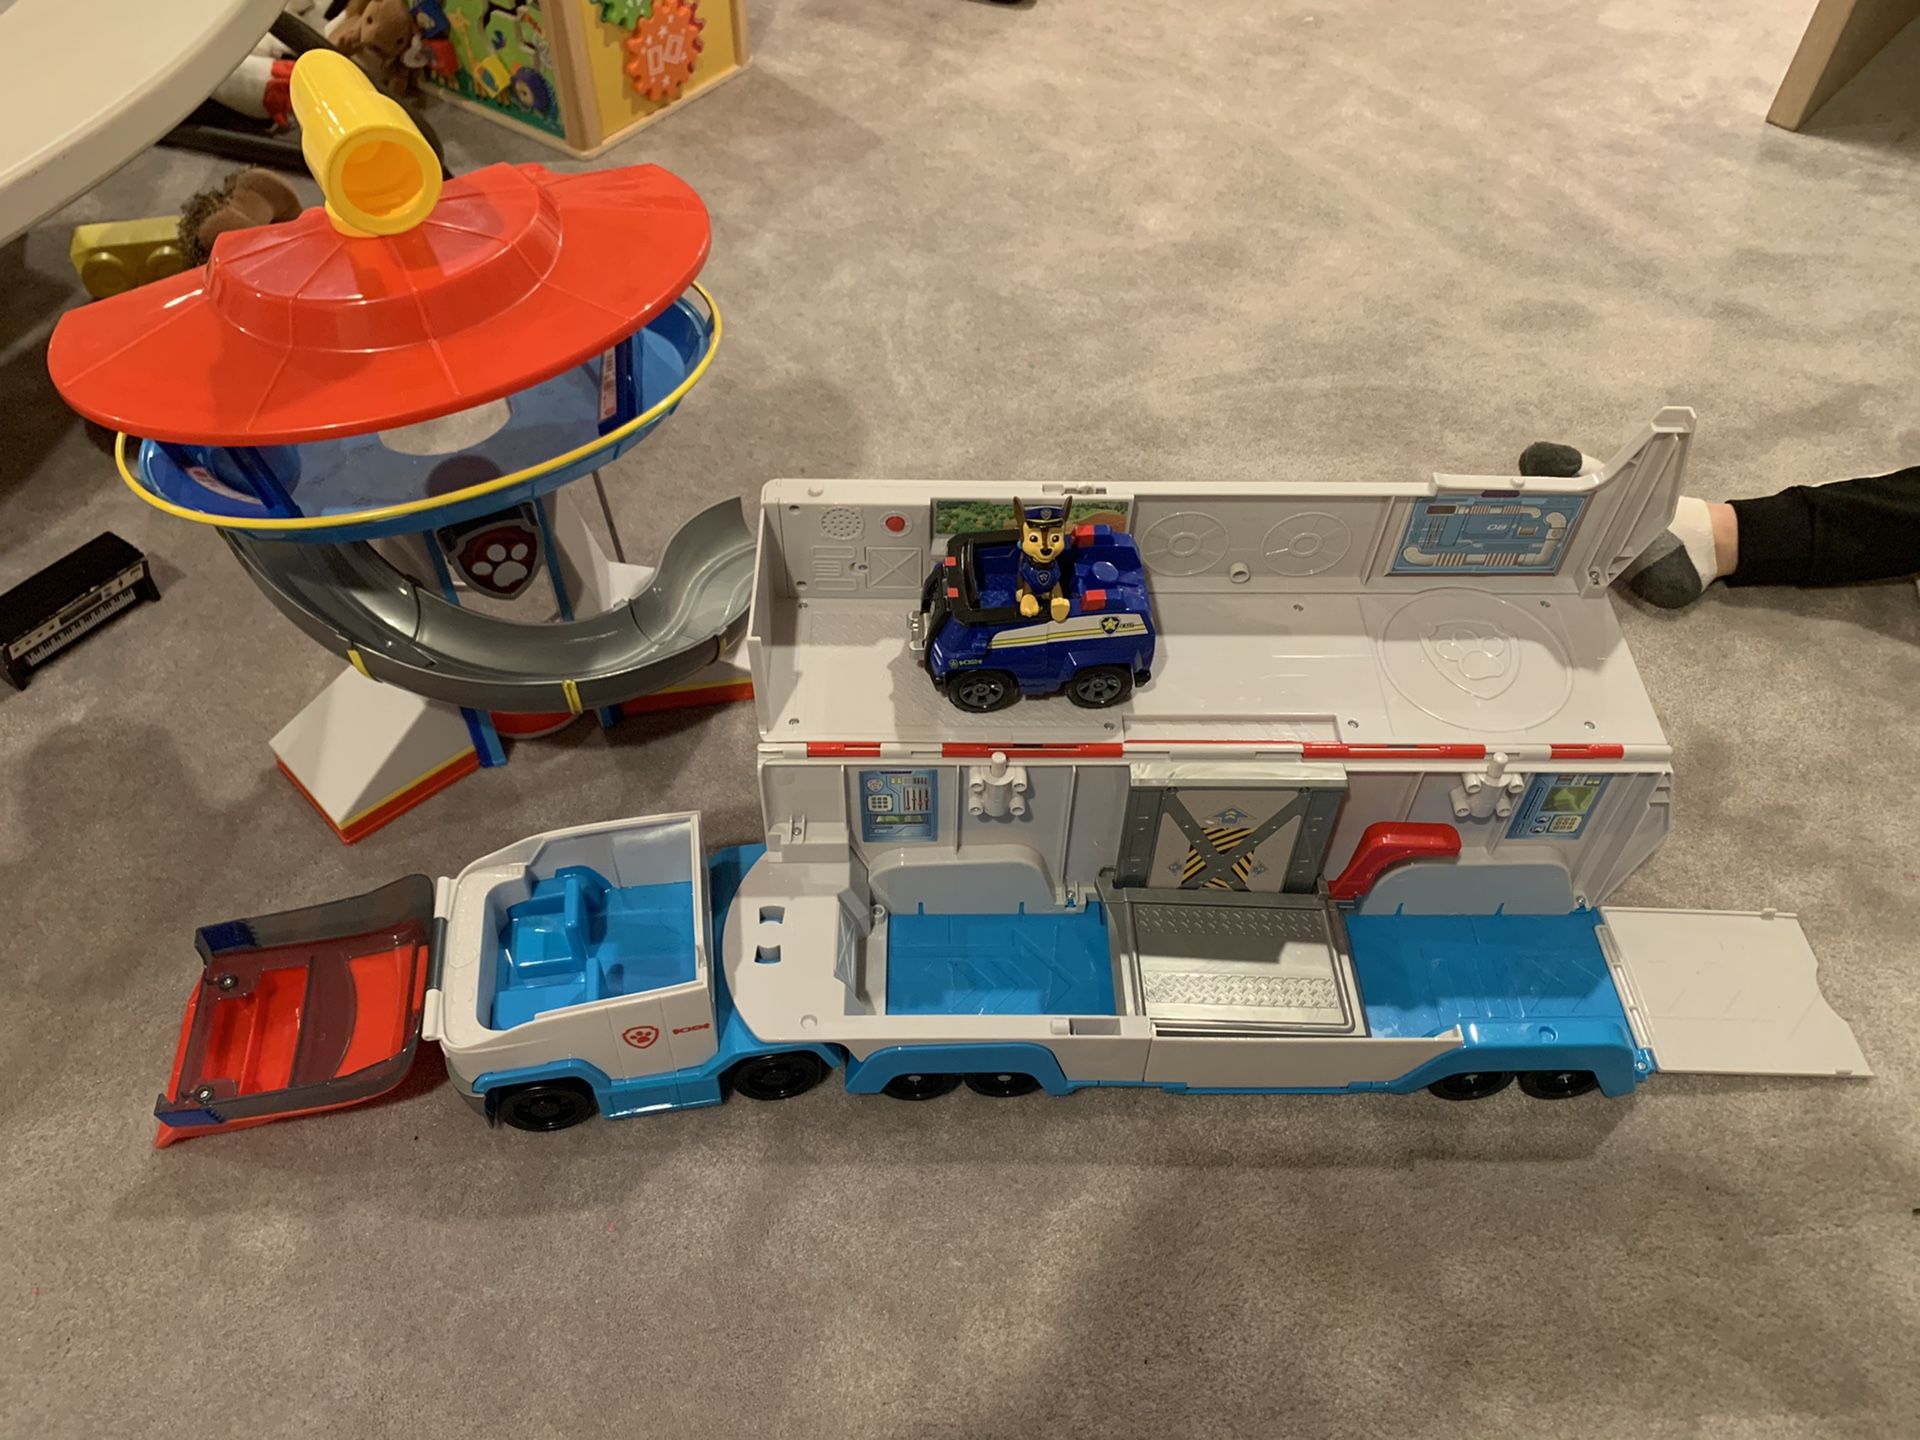 Paw patrol semi and look out play set.